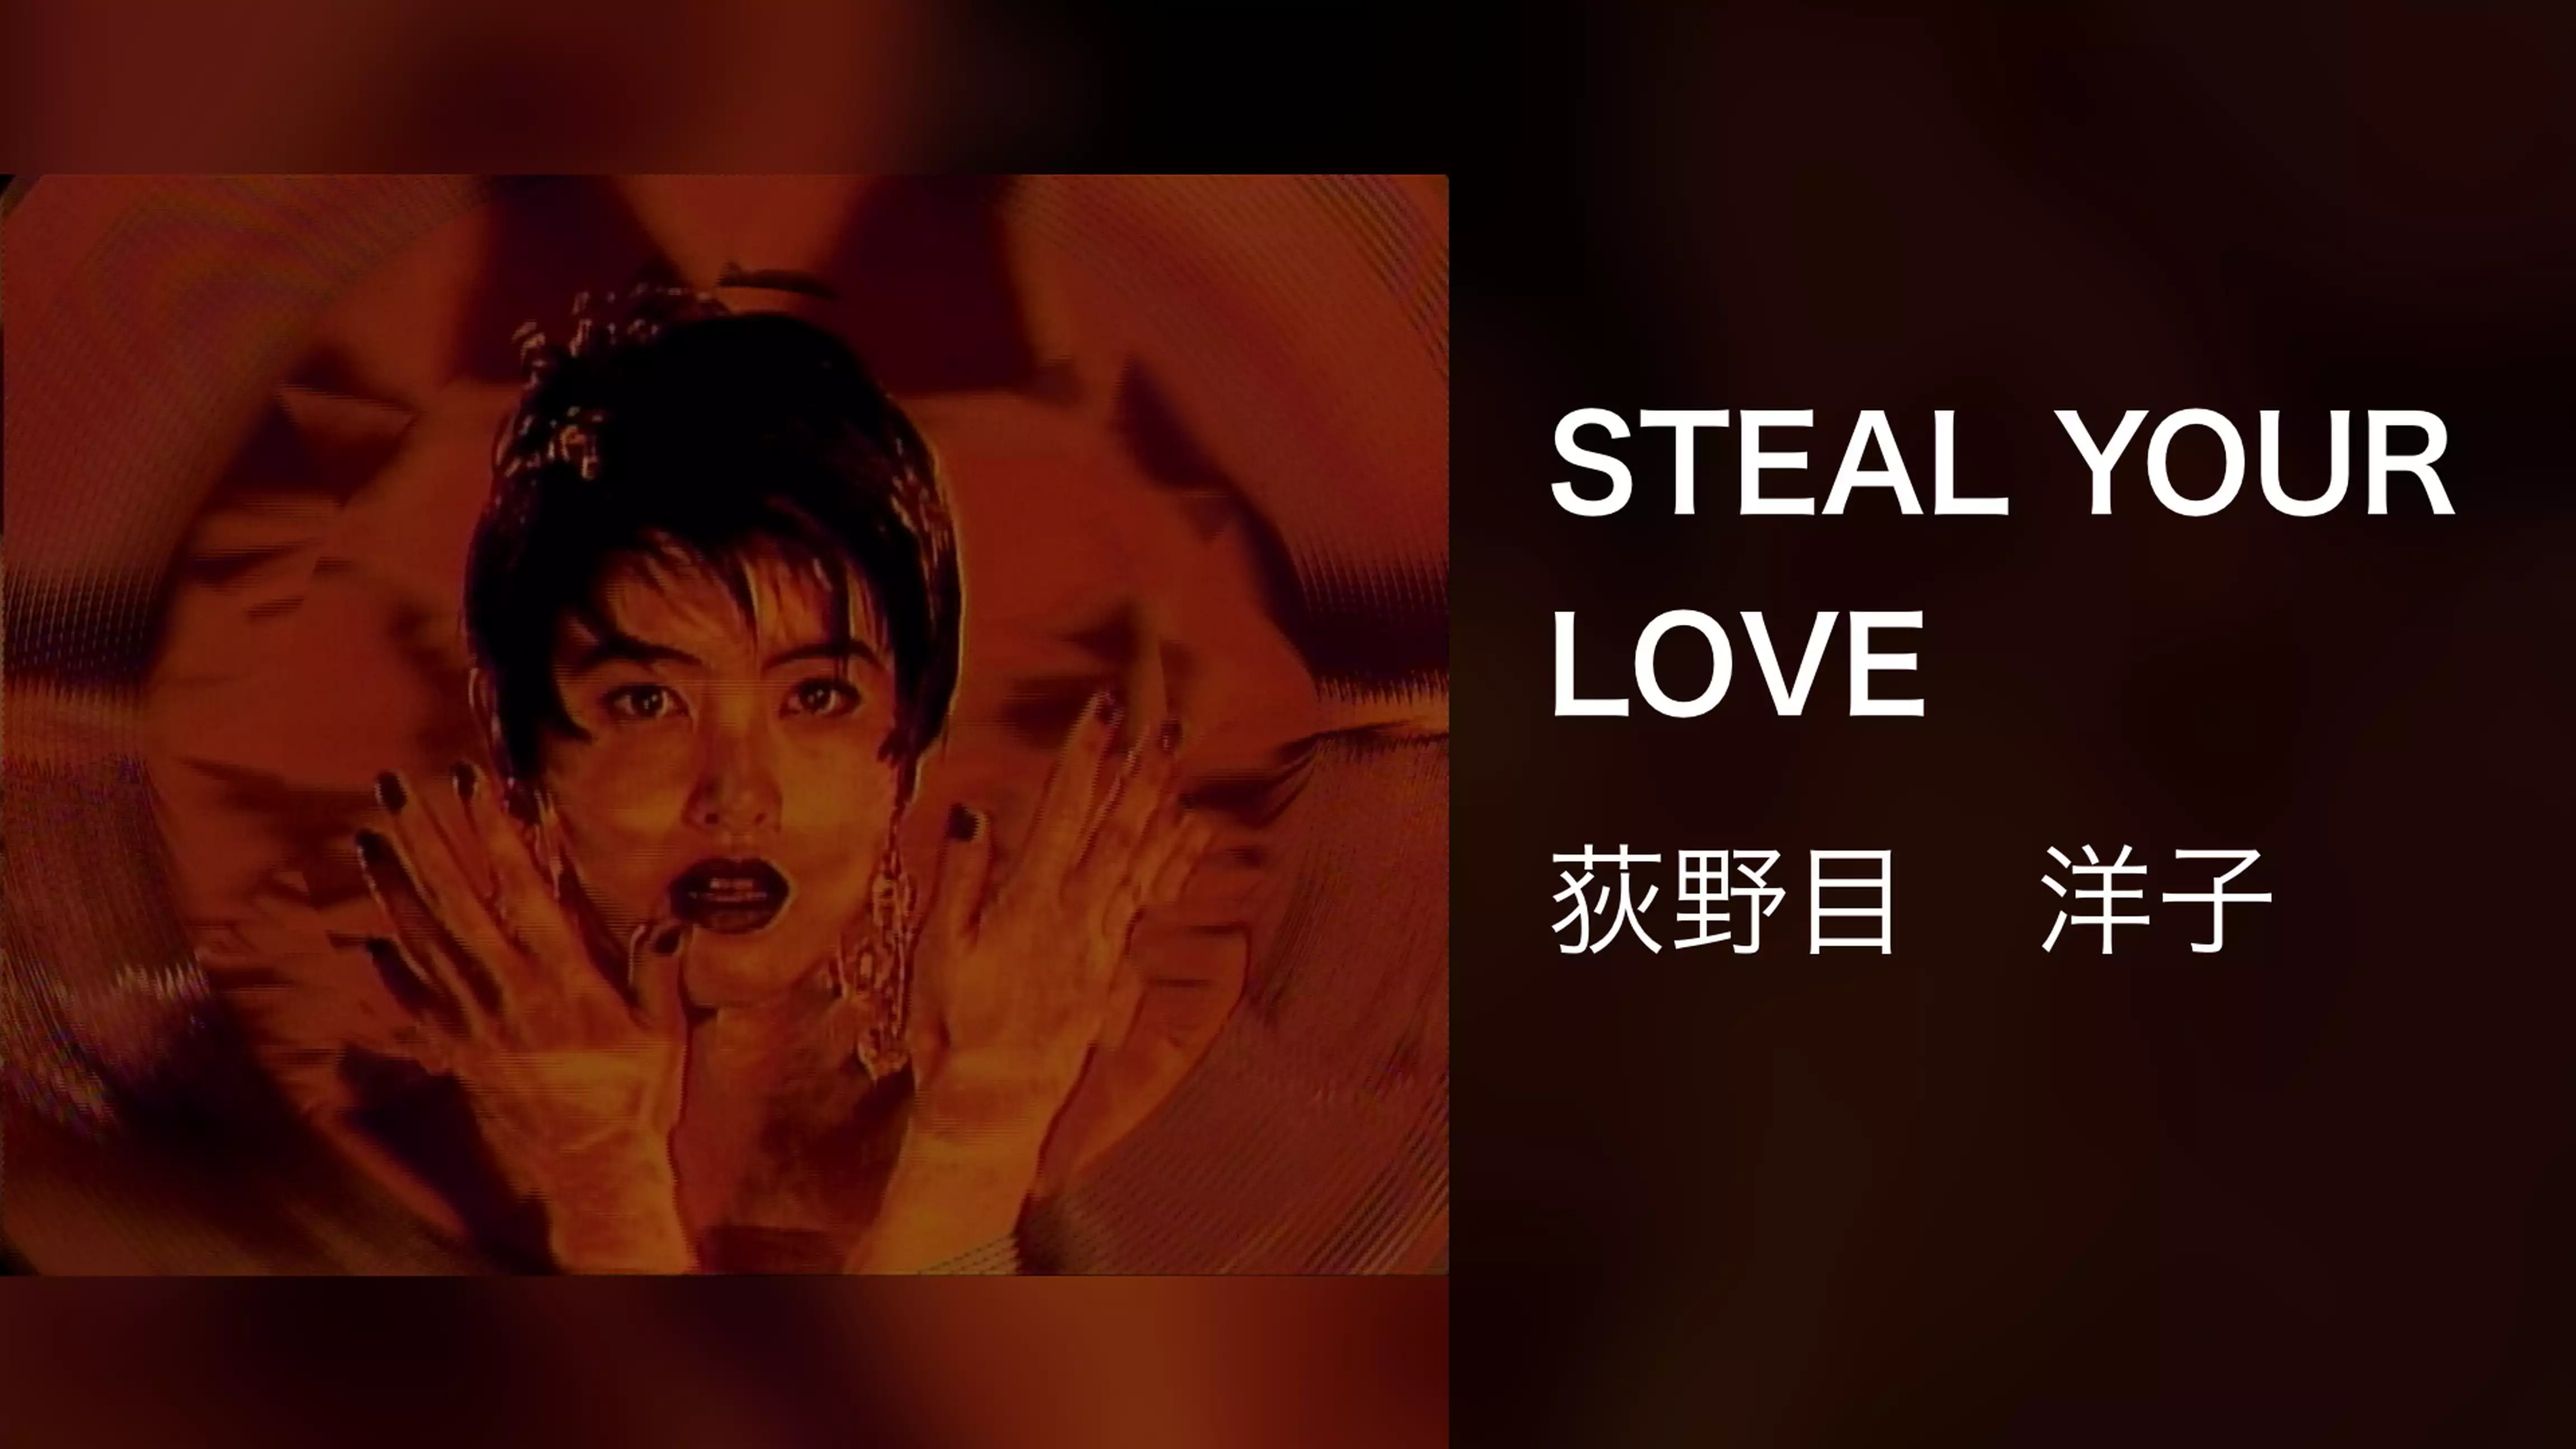 STEAL YOUR LOVE